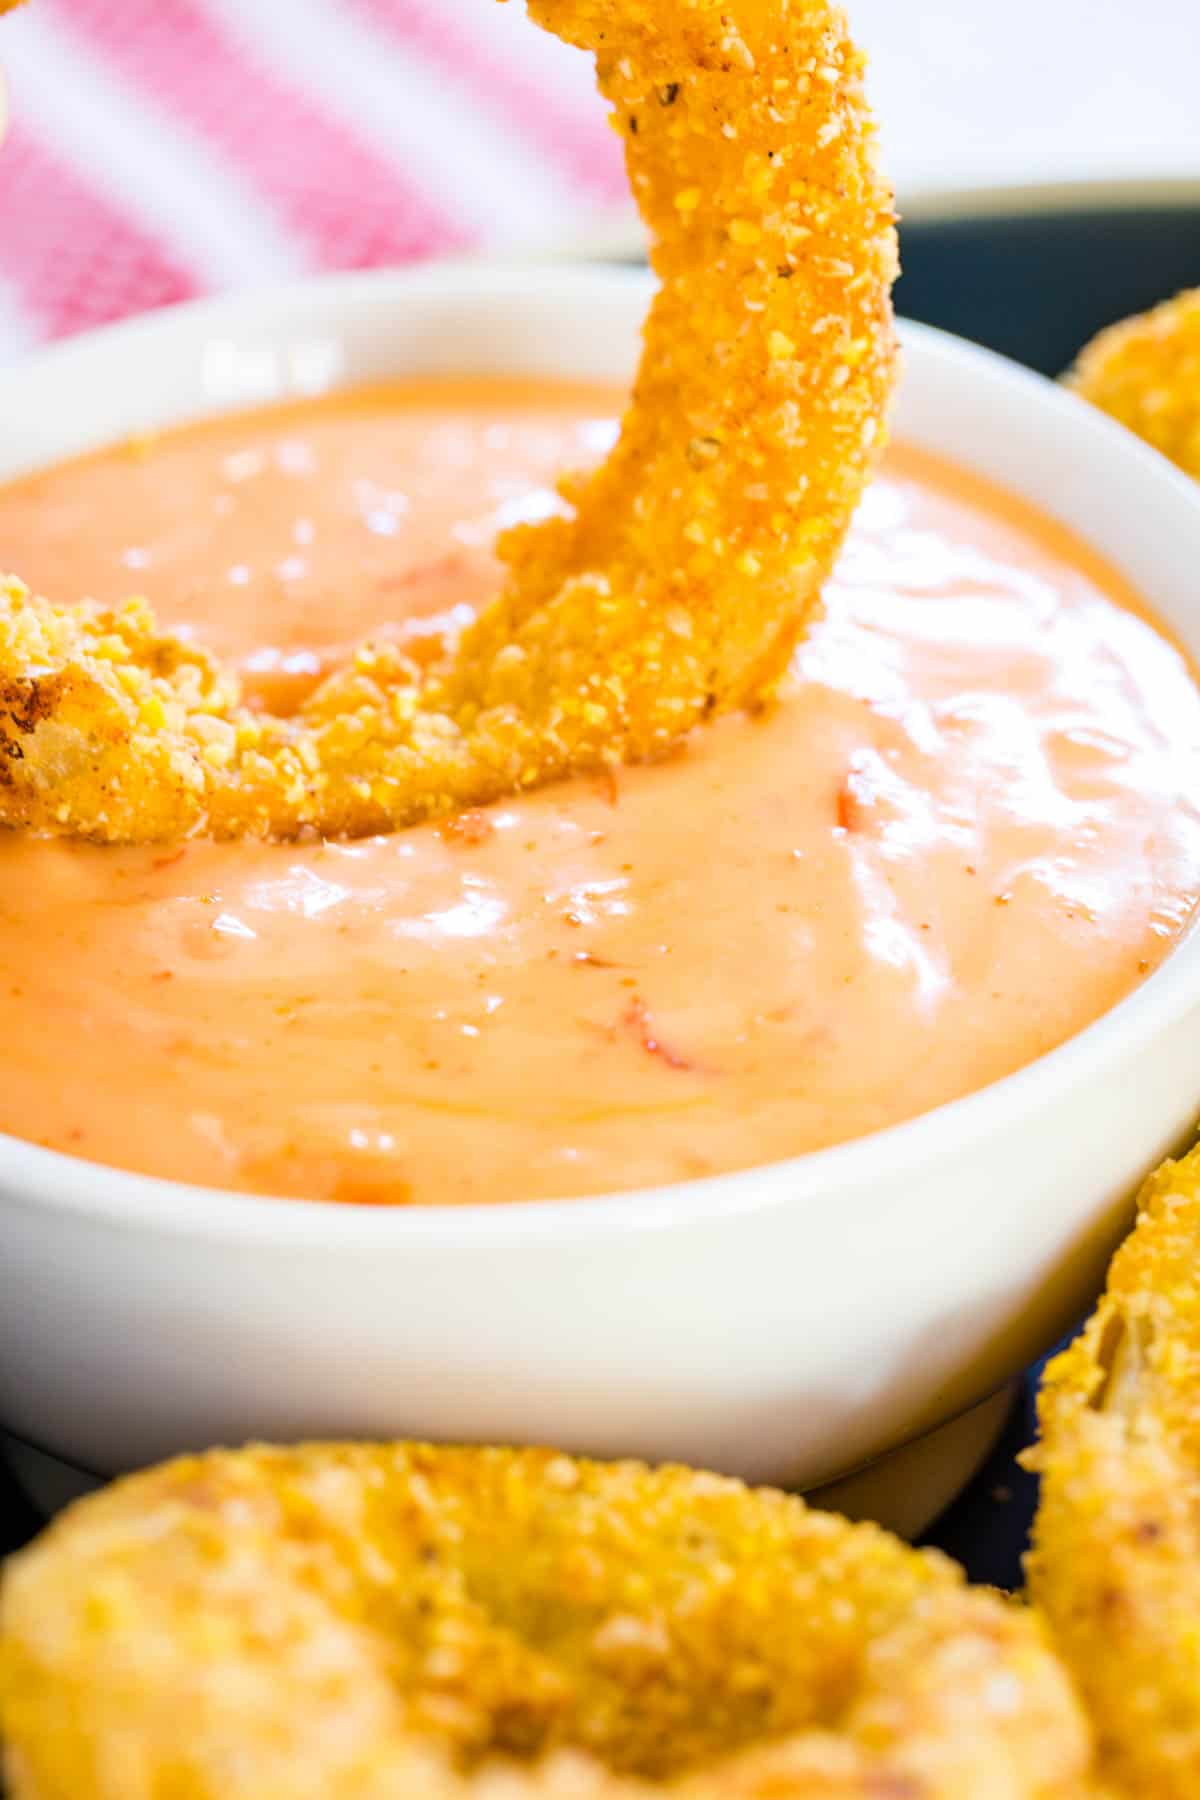 An onion ring being dunked into a small bowl of dipping sauce.